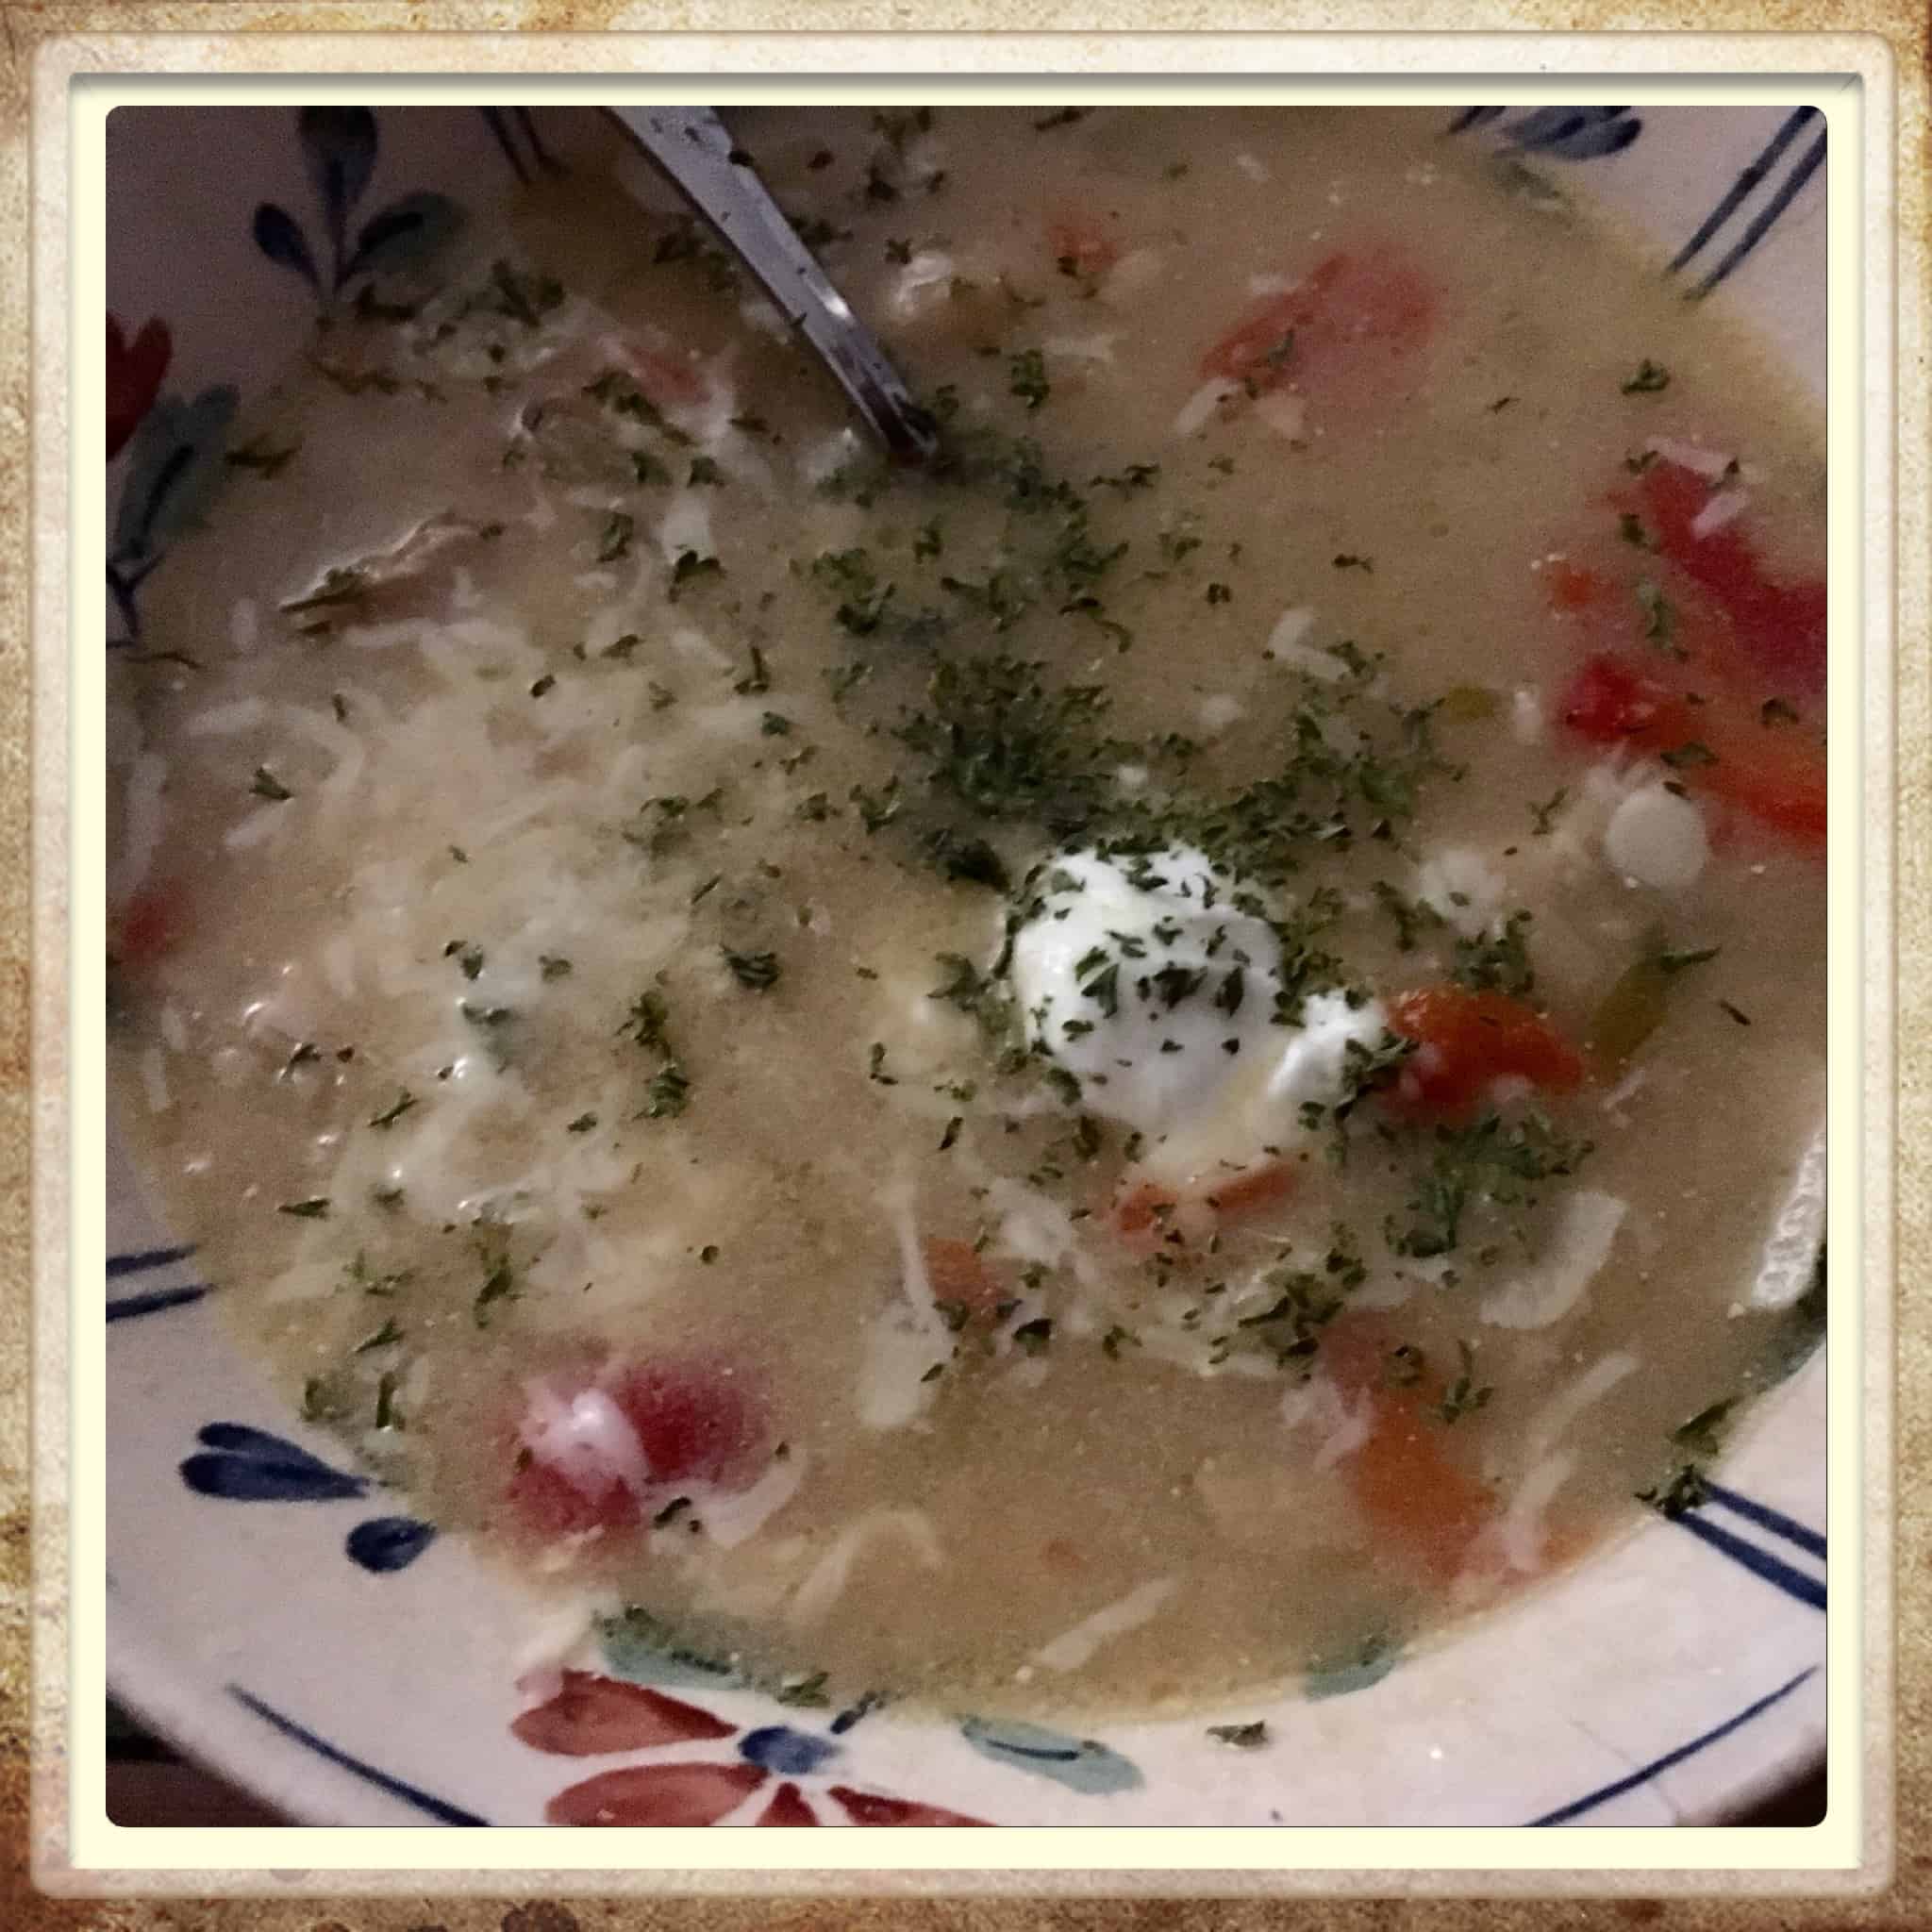 Wellness Wednesday: Crockpot White Chicken Chili for the Soul